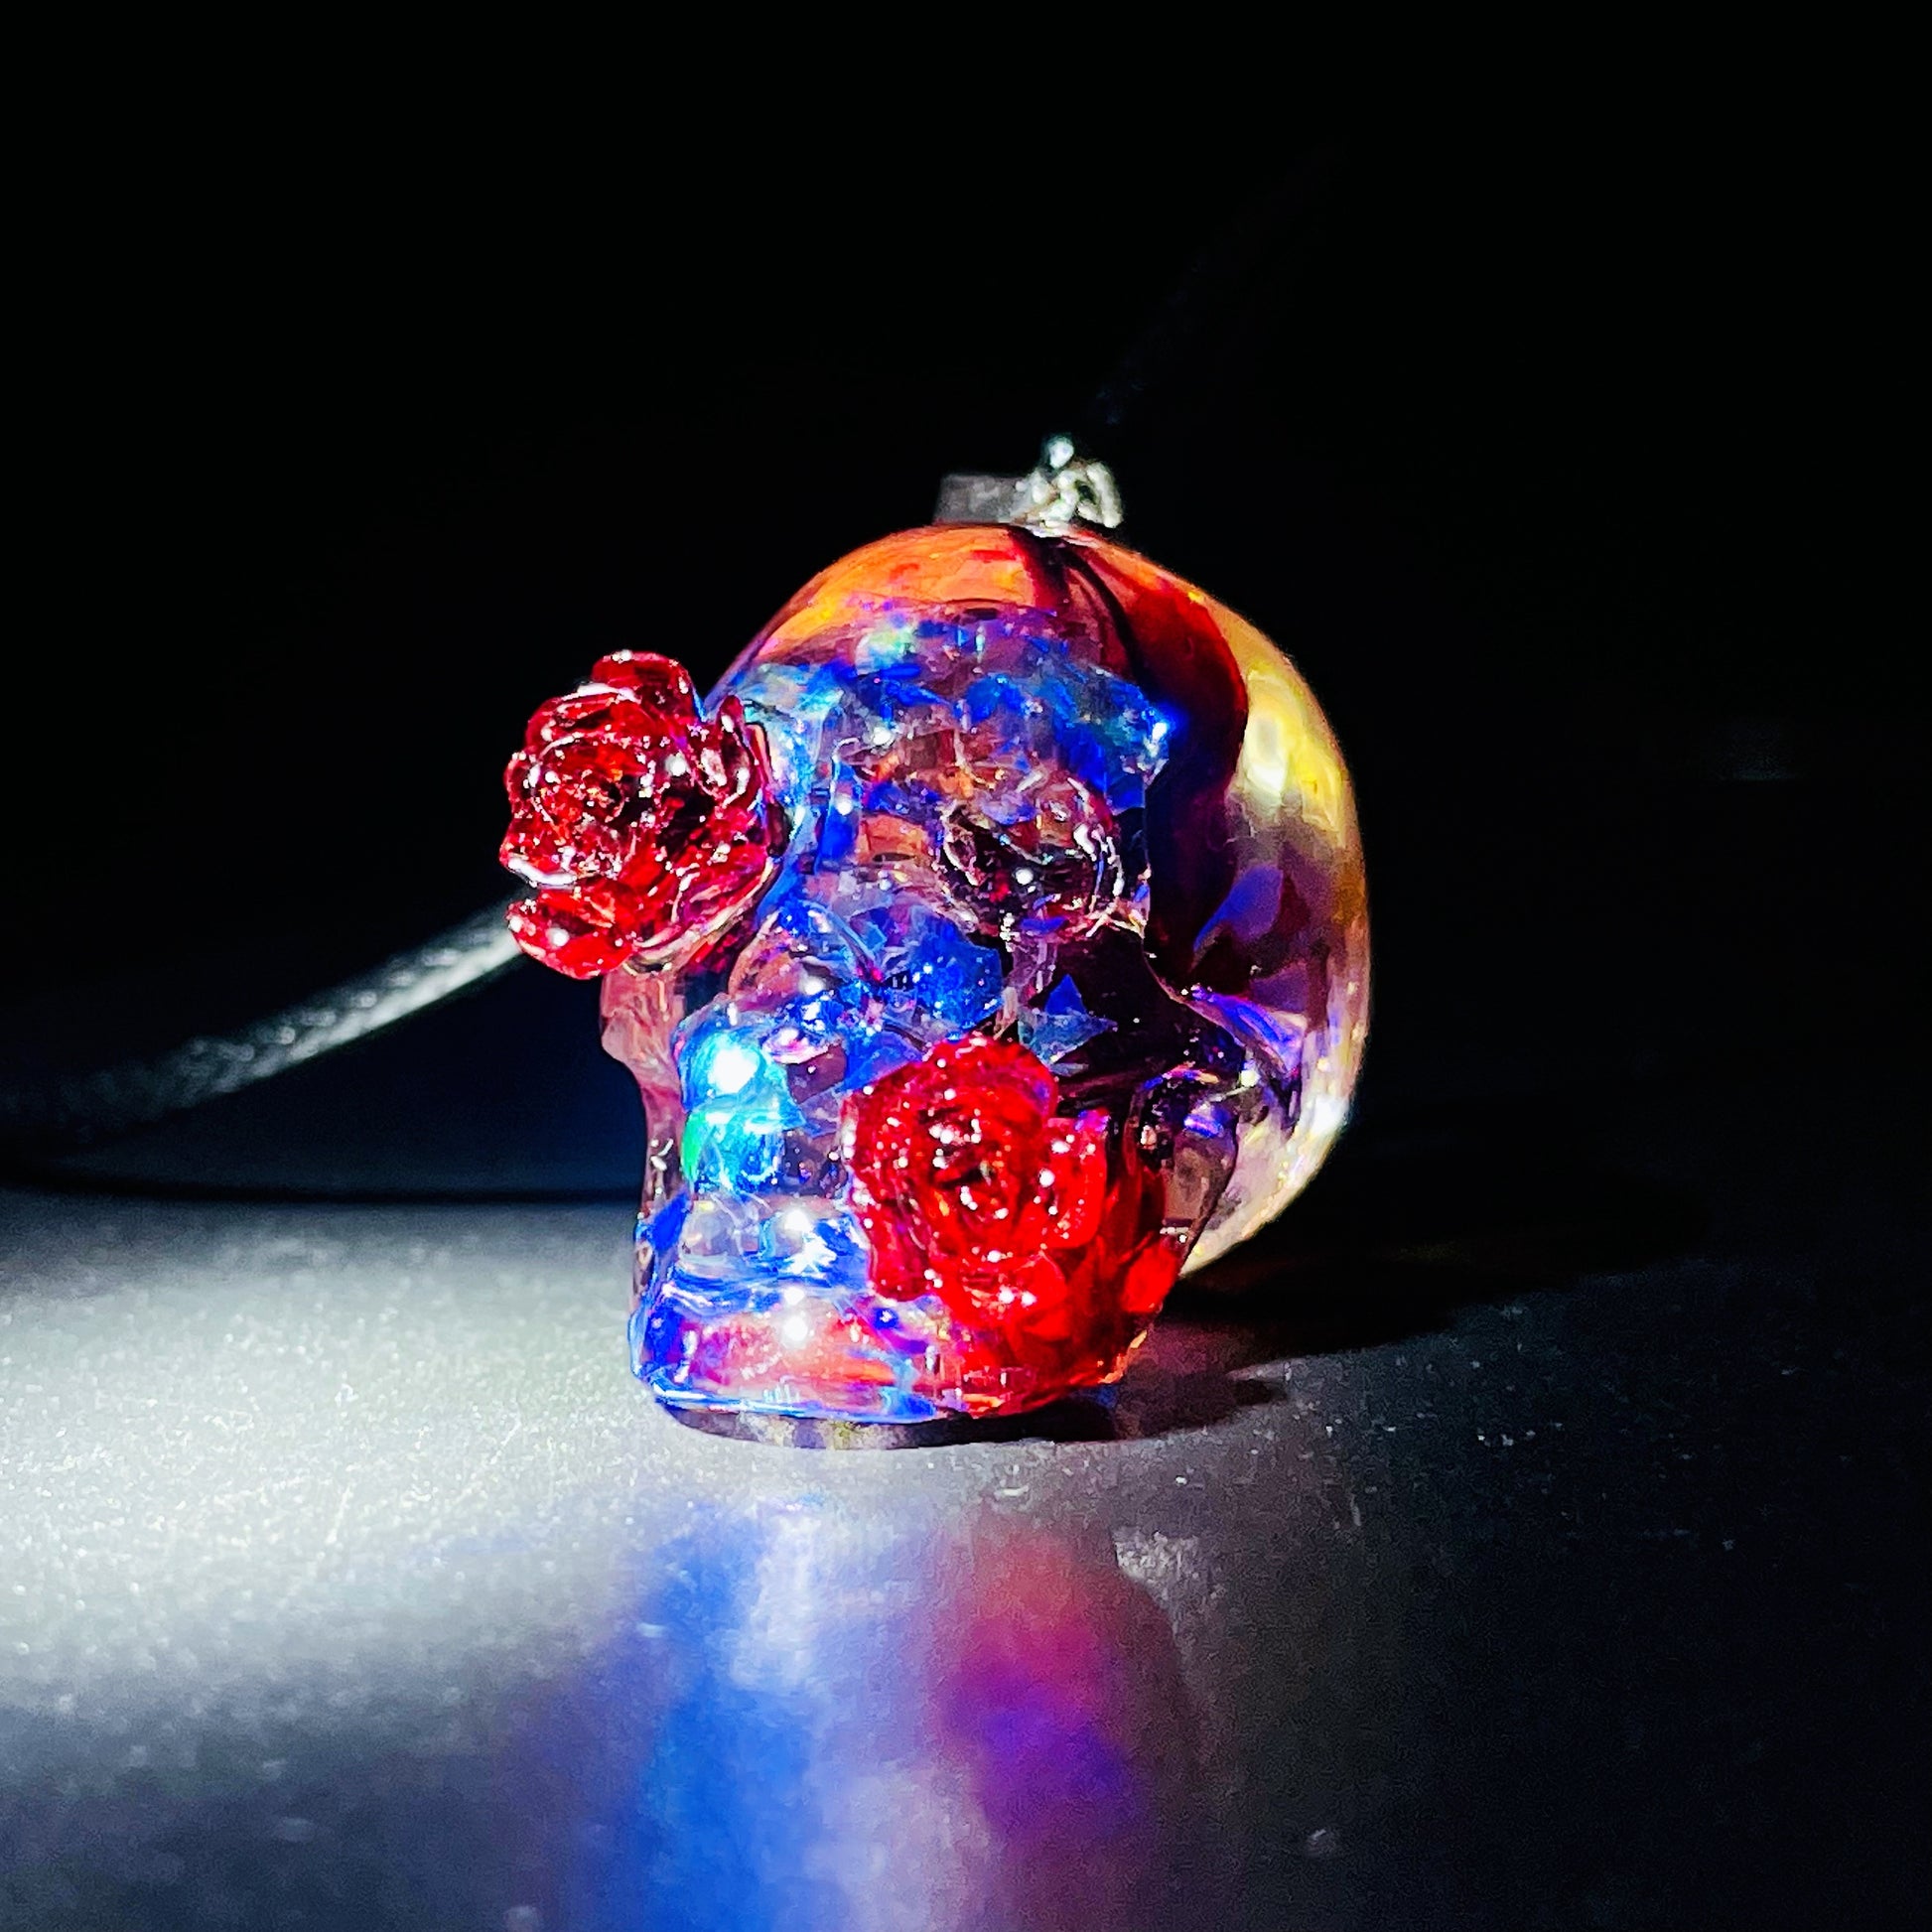 A Personality Gothic Halloween Gift Necklace Lovers with red and blue flowers on it by Maramalive™.